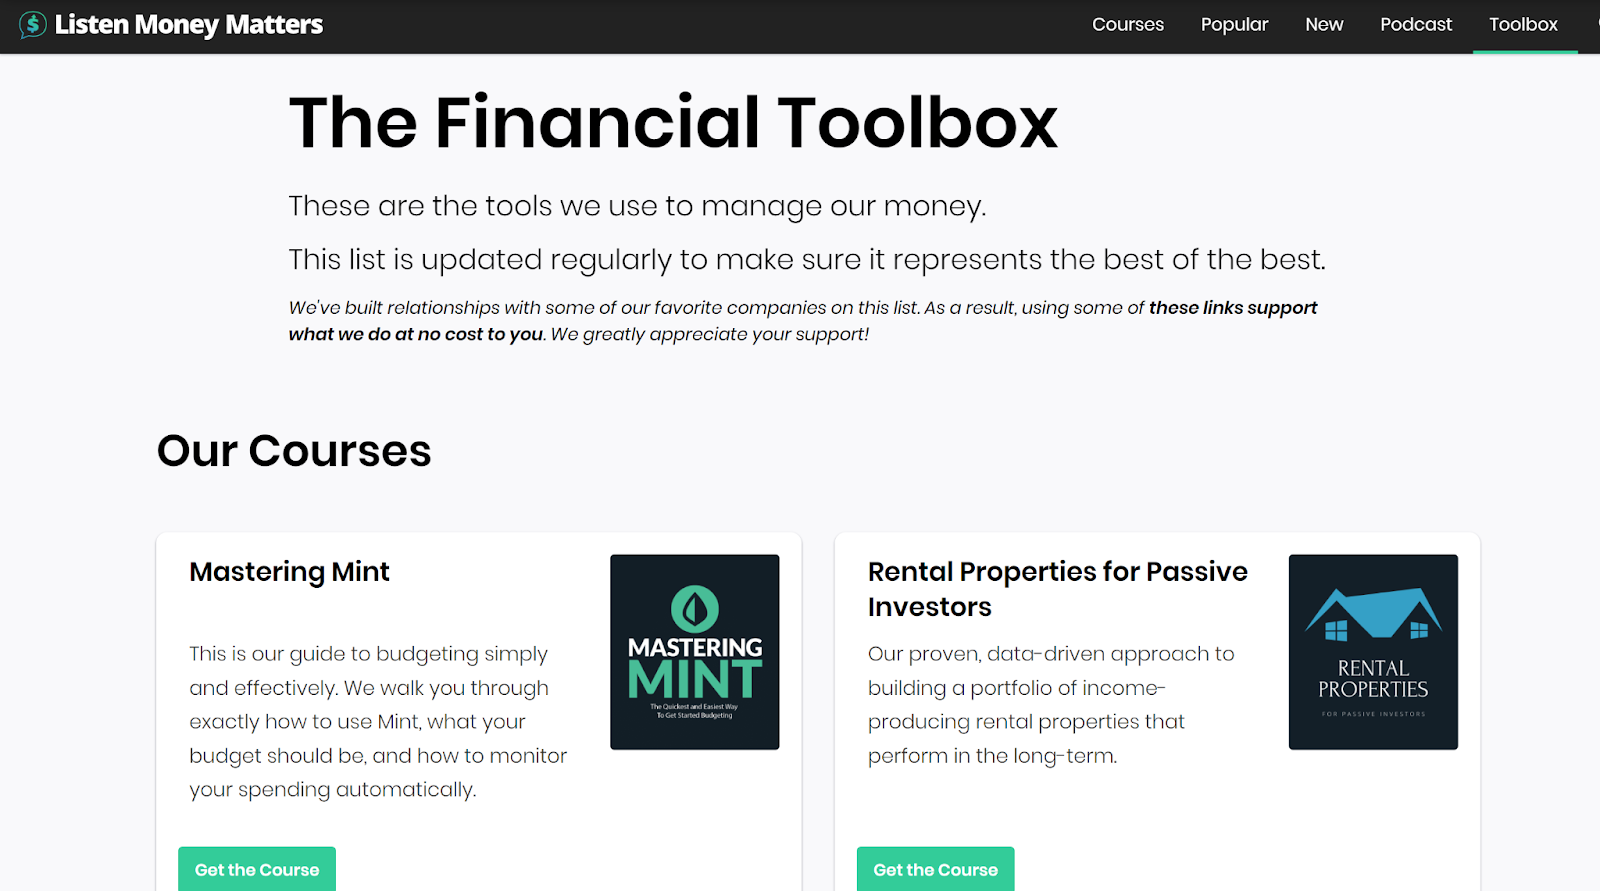 Listen Money Matters Toolbox example resource page